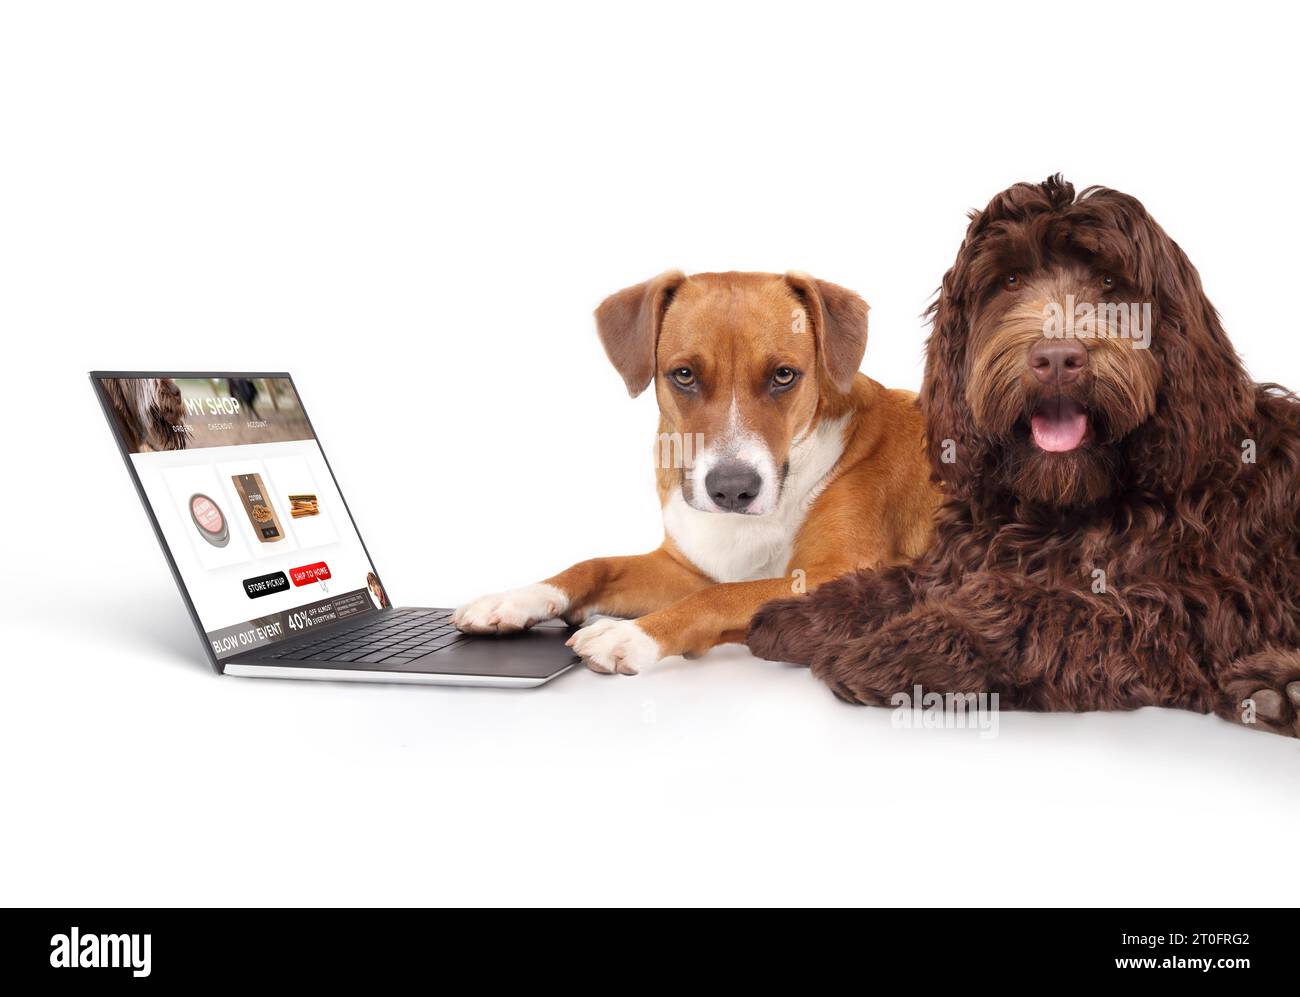 Dog ordering products online while using laptop computer with paw. Two dogs with mockup shopping card screen. Funny pet themed concept for ecommerce, Stock Photo